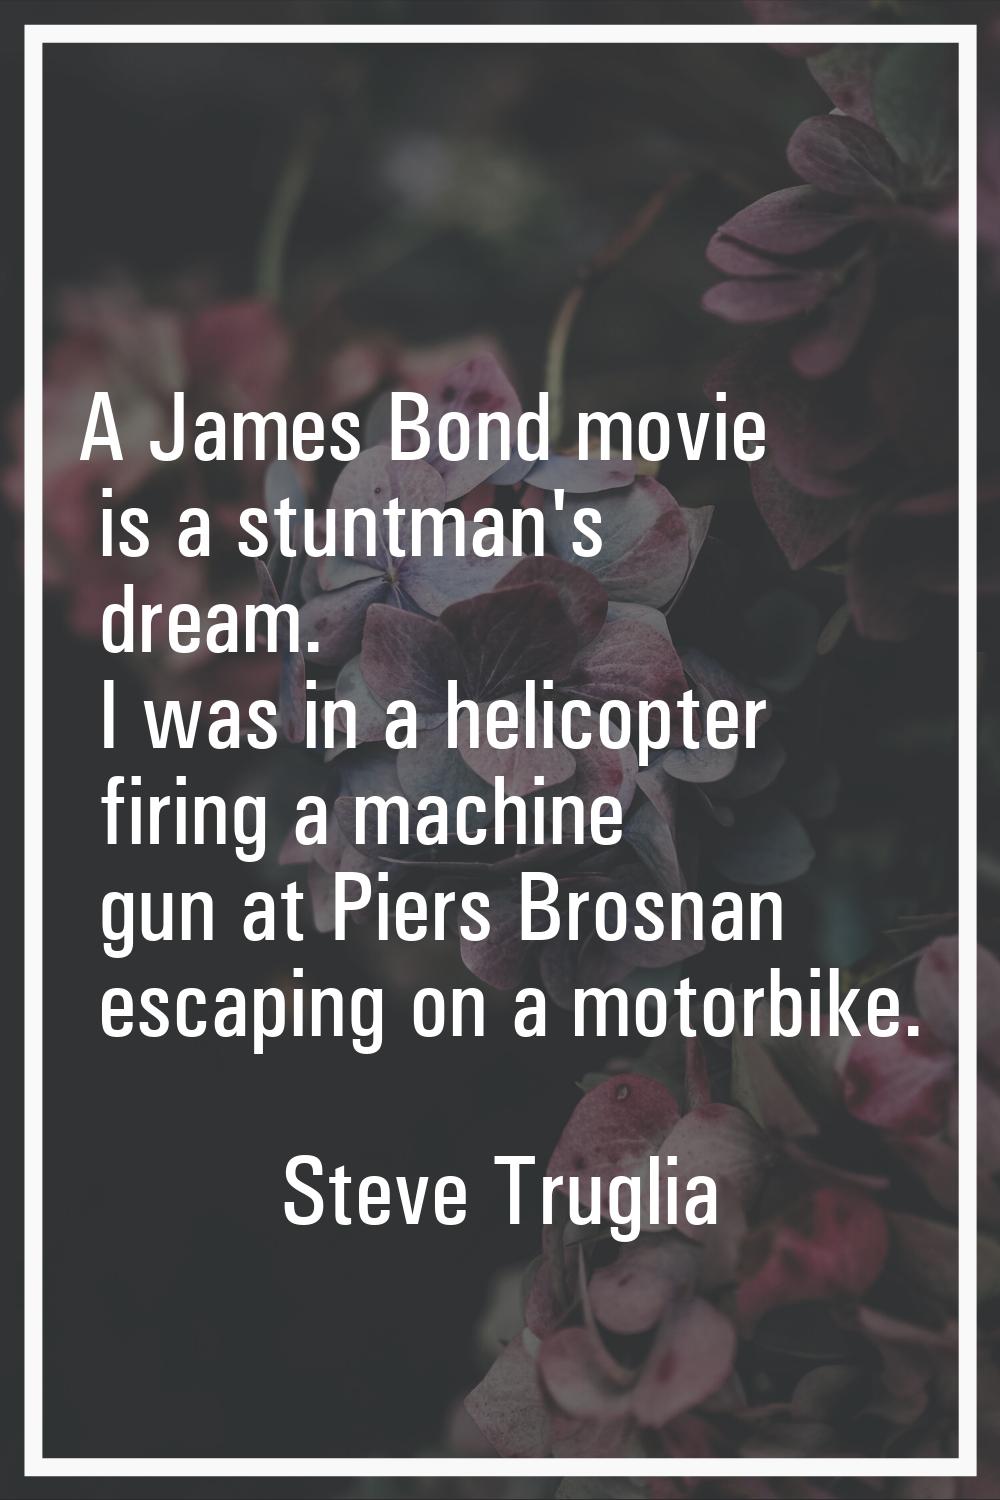 A James Bond movie is a stuntman's dream. I was in a helicopter firing a machine gun at Piers Brosn